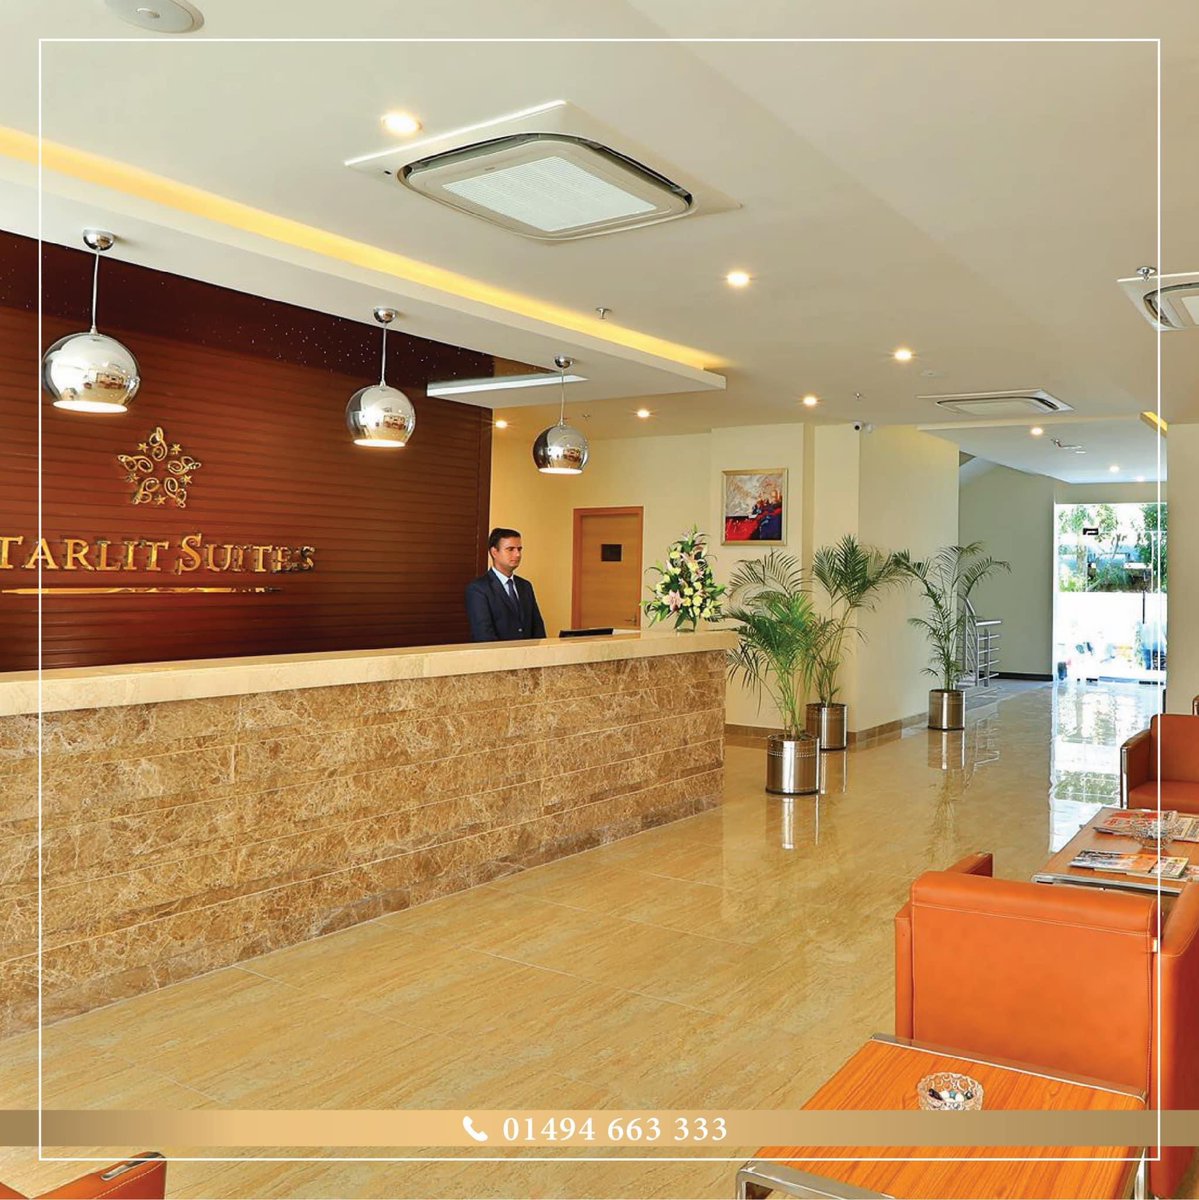 Book yourself a luxurious stay and experience the comfort and warm hospitality of Starlit Suites Neemrana! See you soon 😊 For inquiries and reservations please contact - info@starlitsuites.com 📞 +91 1494-663333 📞 +91 98712 80999 📍Photo- Starlit Suites Neemrana